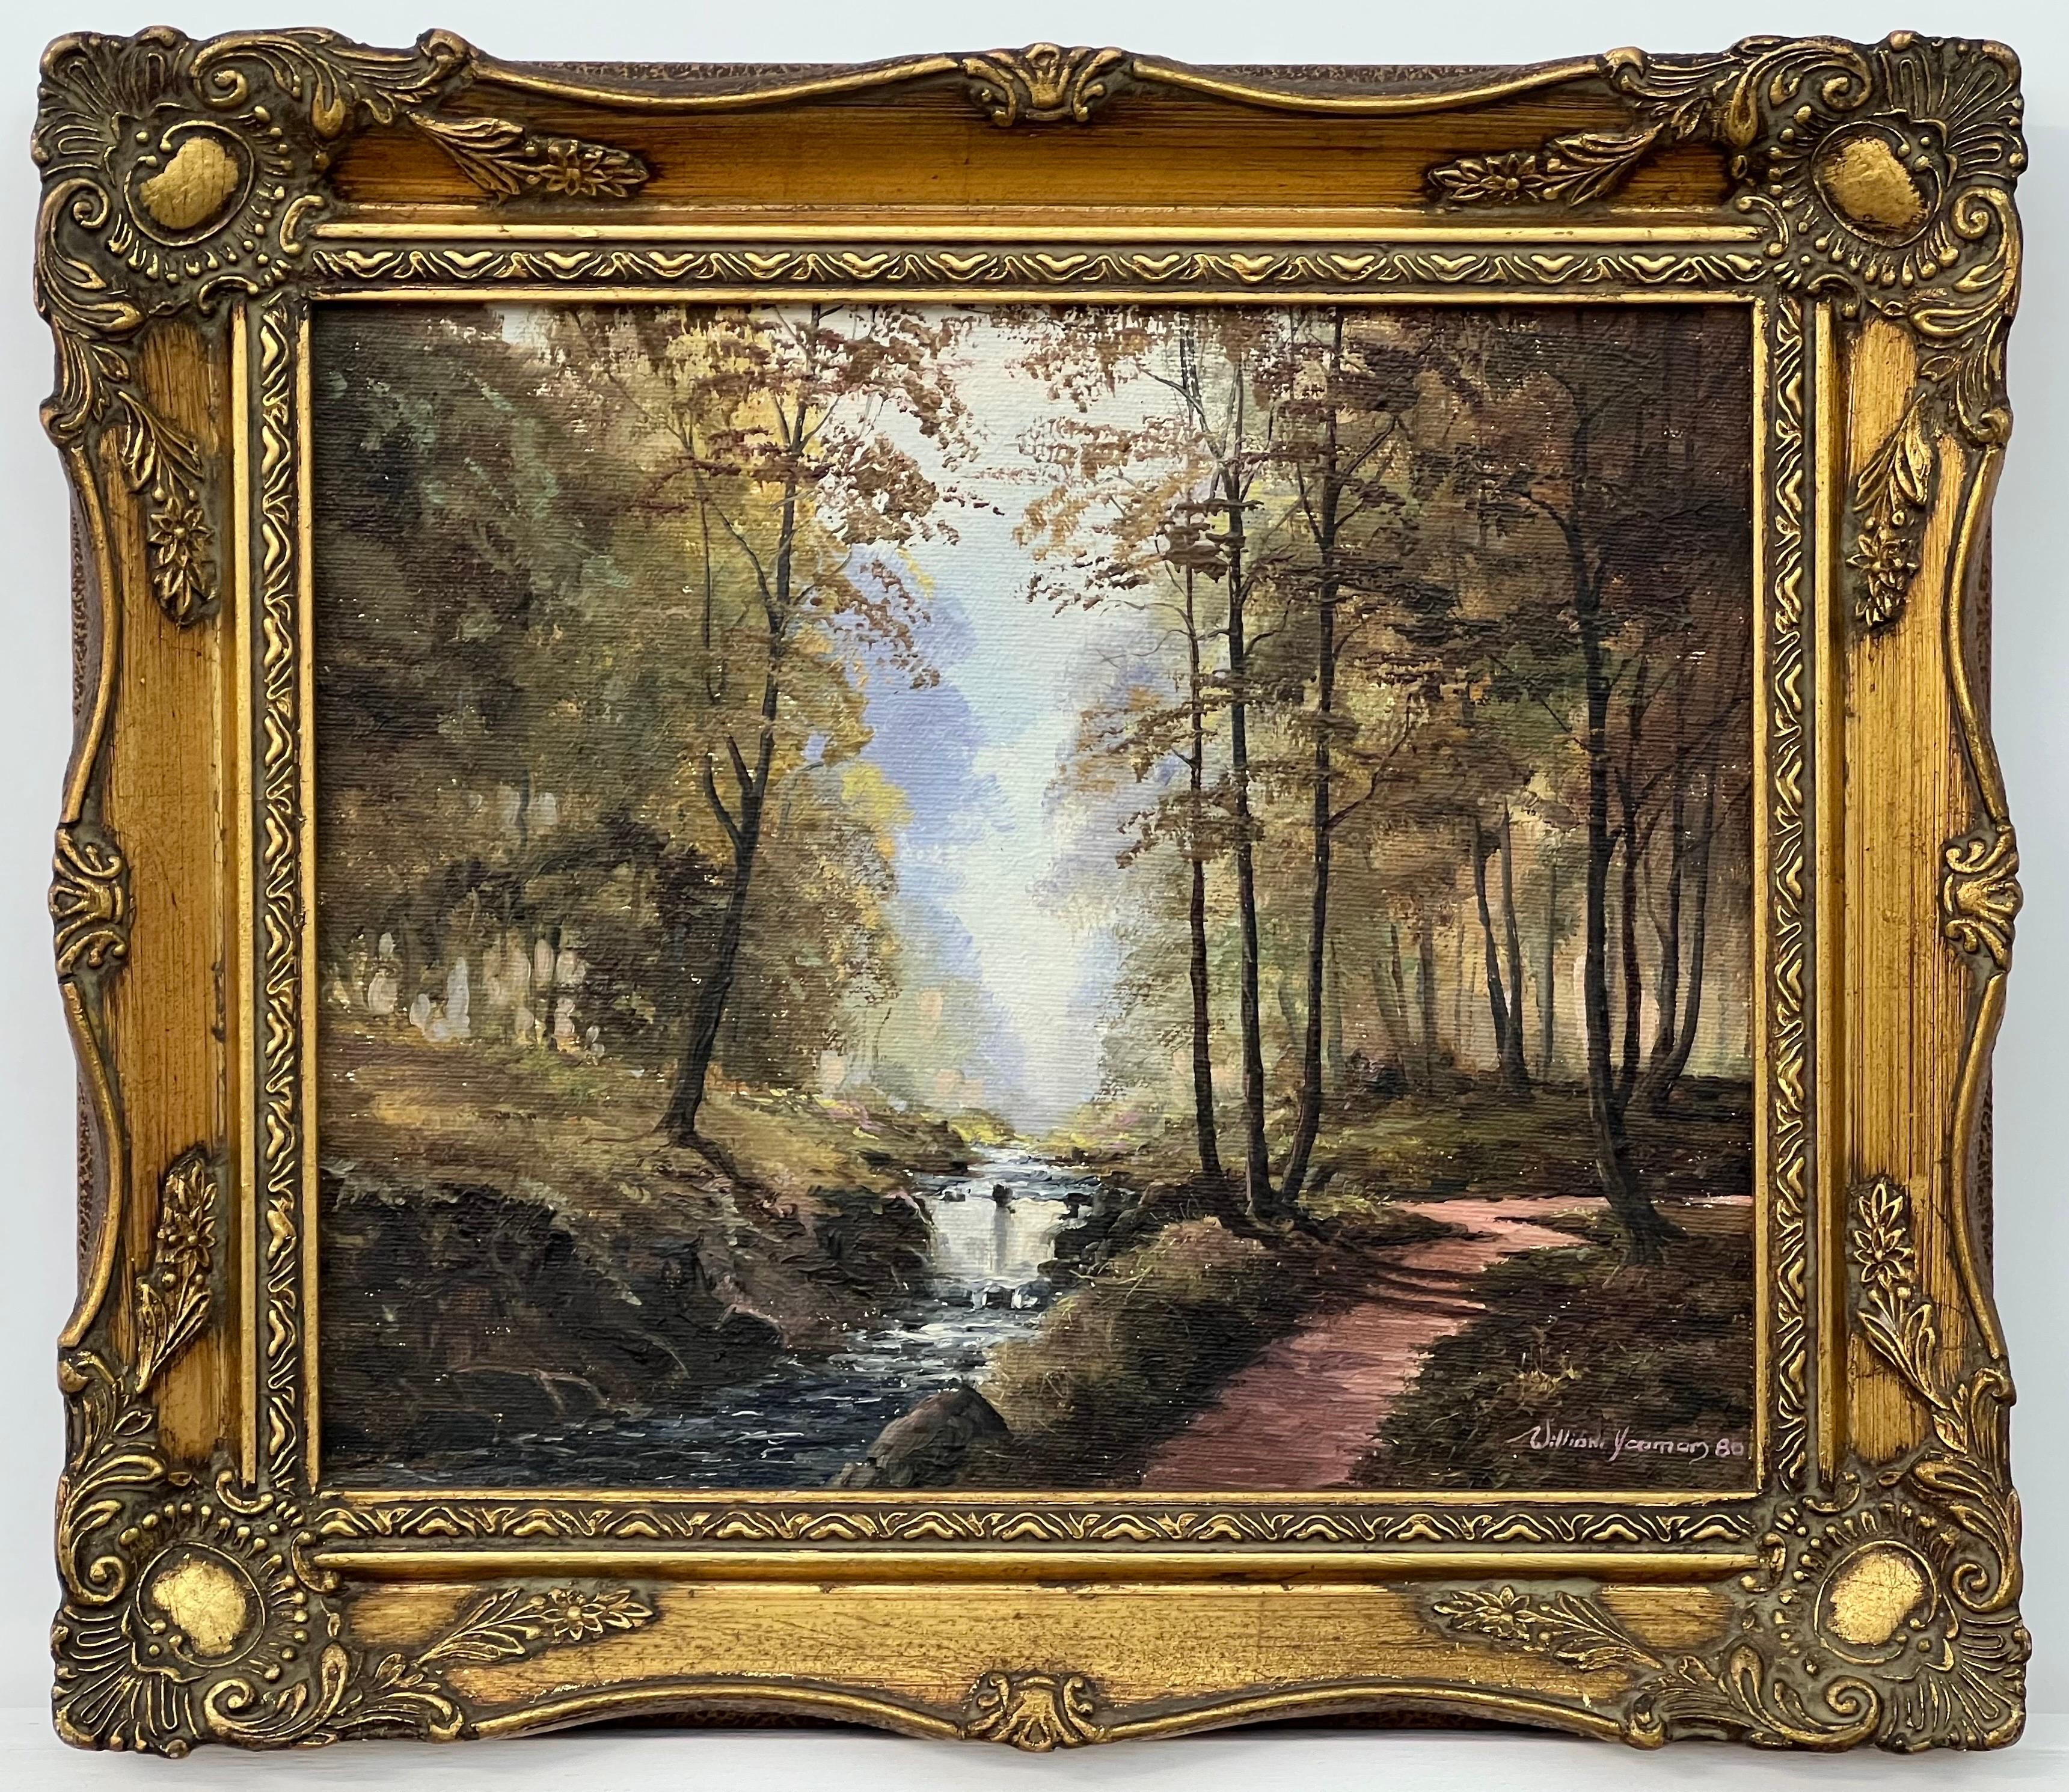 Original Vintage Oil Painting of Tollymore Forest River Landscape in Ireland, by Modern Irish Artist Denis Thornton (1937-1999). Presented in an ornate dark gold frame. 

Art measures 12 x 10 inches
Frame measures 16 x 14 inches 

Denis Thornton was